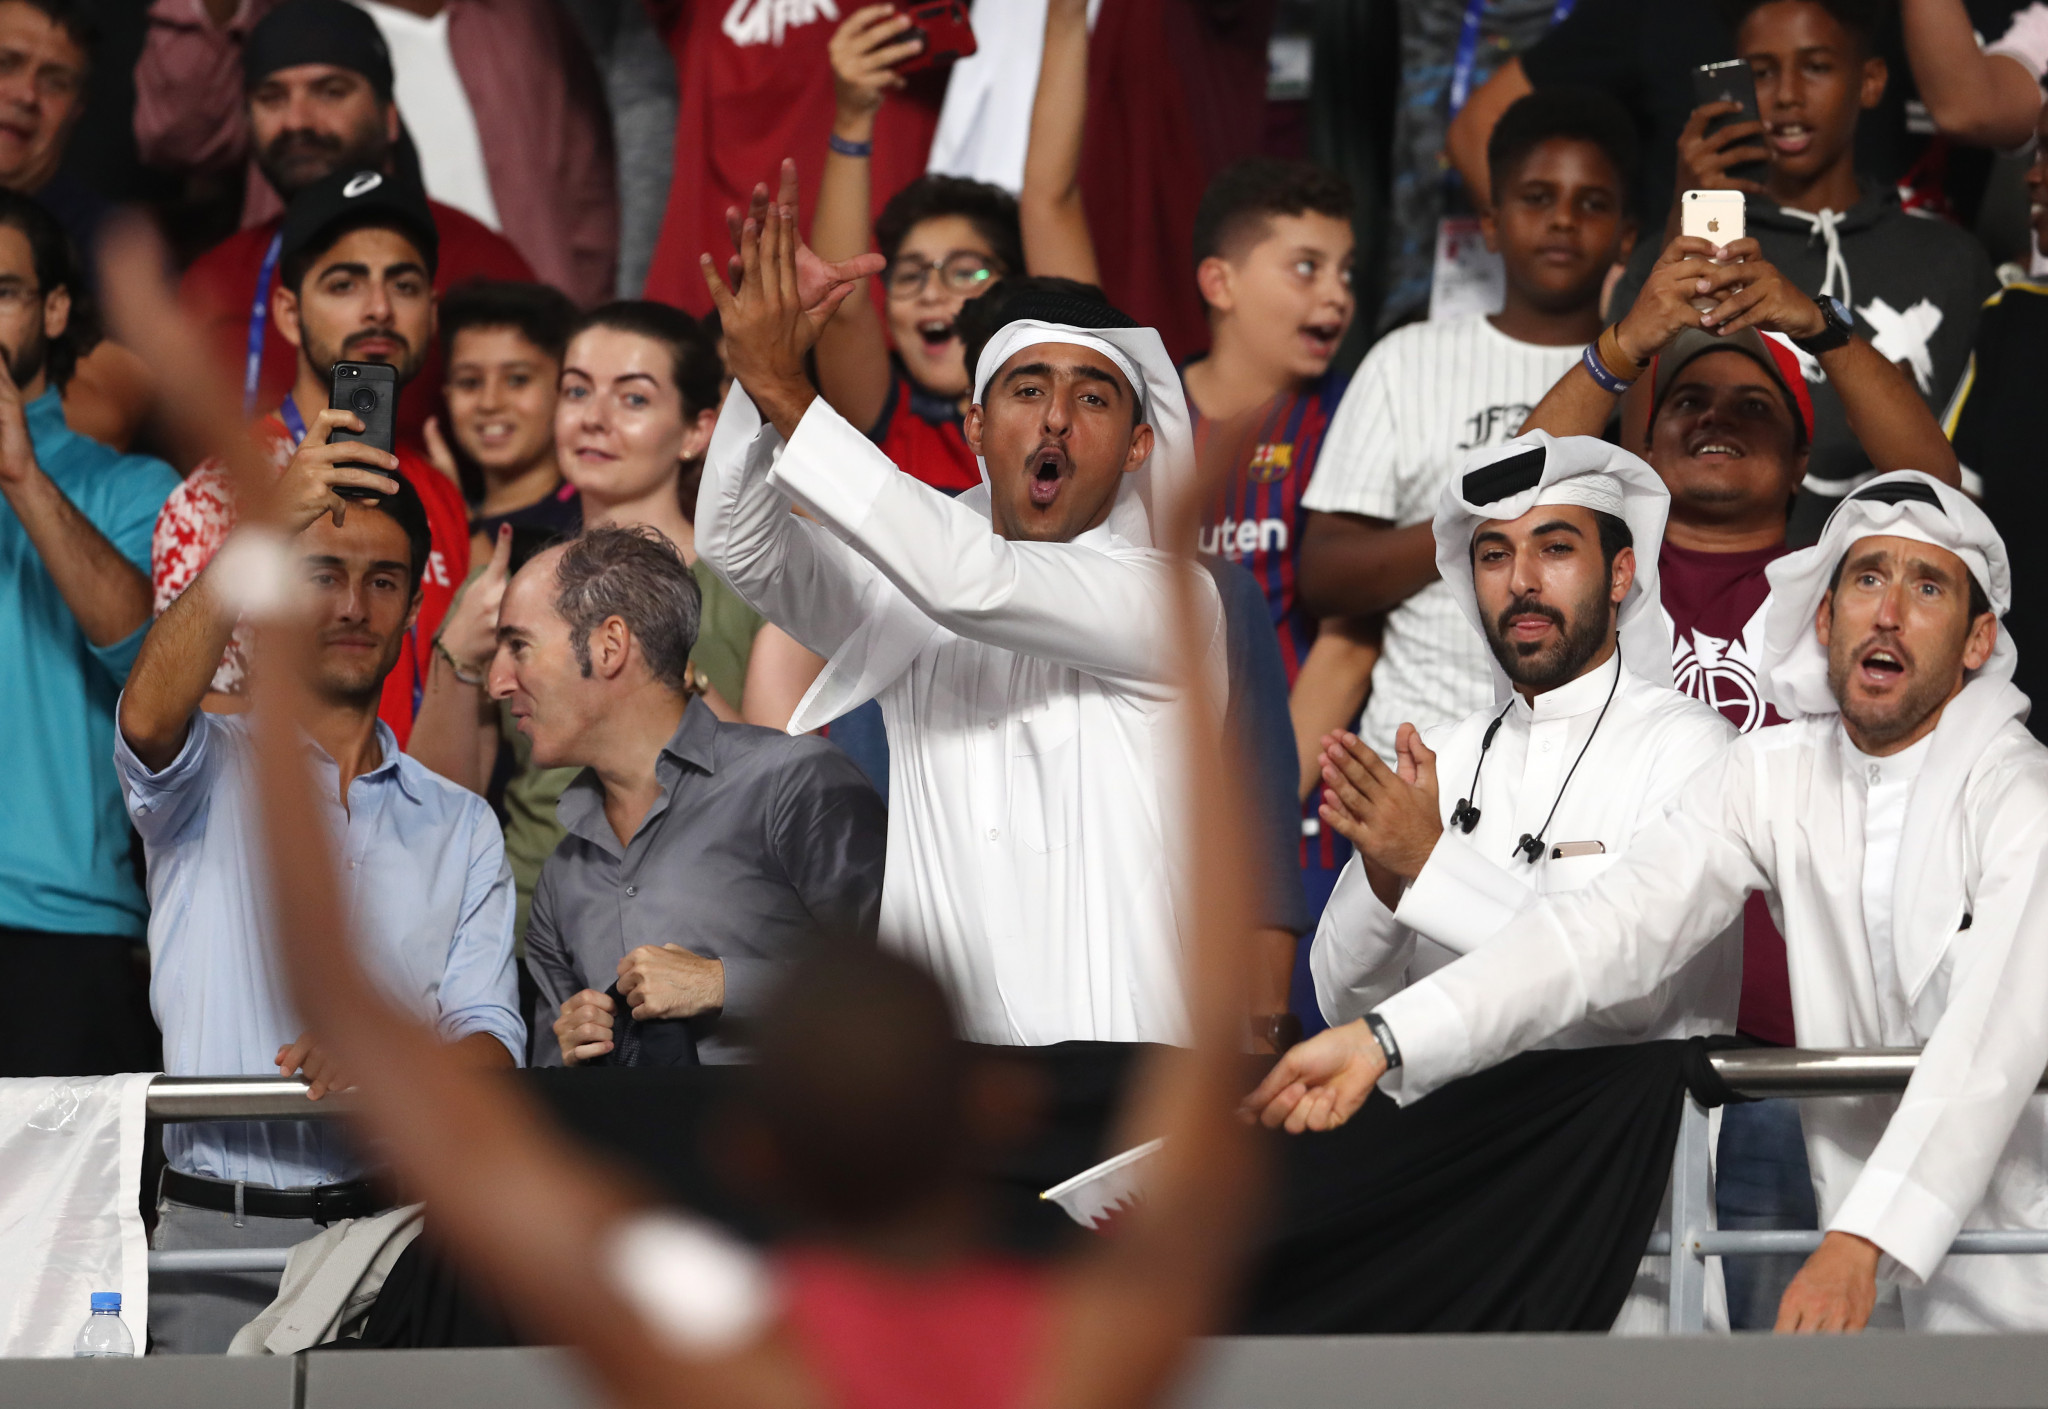 For fans in Doha it was the victory they had been hoping for - expecting even ©Getty Images